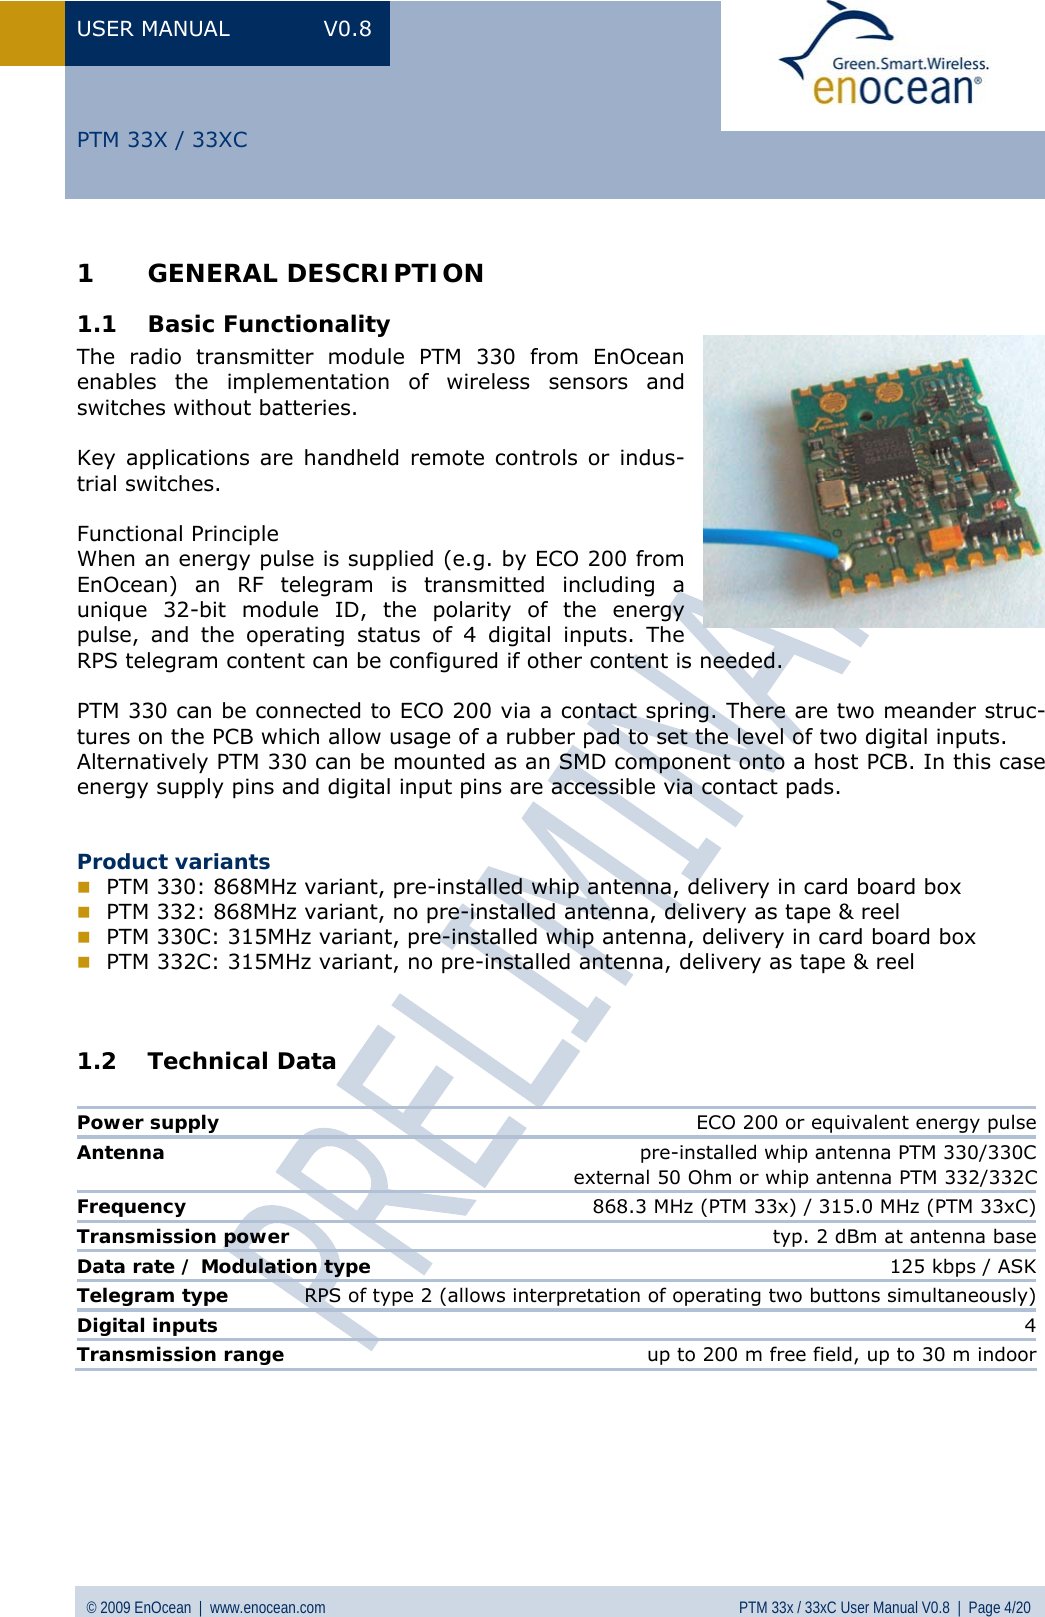 USER MANUAL V0.8 © 2009 EnOcean  |  www.enocean.com  PTM 33x / 33xC User Manual V0.8  |  Page 4/20   PTM 33X / 33XC 1 GENERAL DESCRIPTION 1.1 Basic Functionality The radio transmitter module PTM 330 from EnOcean enables the implementation of wireless sensors and switches without batteries.   Key applications are handheld remote controls or indus-trial switches.   Functional Principle When an energy pulse is supplied (e.g. by ECO 200 from EnOcean) an RF telegram is transmitted including a unique 32-bit module ID, the polarity of the energy pulse, and the operating status of 4 digital inputs. The RPS telegram content can be configured if other content is needed.  PTM 330 can be connected to ECO 200 via a contact spring. There are two meander struc-tures on the PCB which allow usage of a rubber pad to set the level of two digital inputs.  Alternatively PTM 330 can be mounted as an SMD component onto a host PCB. In this case energy supply pins and digital input pins are accessible via contact pads.   Product variants  PTM 330: 868MHz variant, pre-installed whip antenna, delivery in card board box  PTM 332: 868MHz variant, no pre-installed antenna, delivery as tape &amp; reel  PTM 330C: 315MHz variant, pre-installed whip antenna, delivery in card board box  PTM 332C: 315MHz variant, no pre-installed antenna, delivery as tape &amp; reel   1.2 Technical Data   Power supply  ECO 200 or equivalent energy pulseAntenna  pre-installed whip antenna PTM 330/330C                                                                      external 50 Ohm or whip antenna PTM 332/332CFrequency  868.3 MHz (PTM 33x) / 315.0 MHz (PTM 33xC)Transmission power  typ. 2 dBm at antenna baseData rate / Modulation type  125 kbps / ASKTelegram type   RPS of type 2 (allows interpretation of operating two buttons simultaneously)Digital inputs   4Transmission range   up to 200 m free field, up to 30 m indoor     